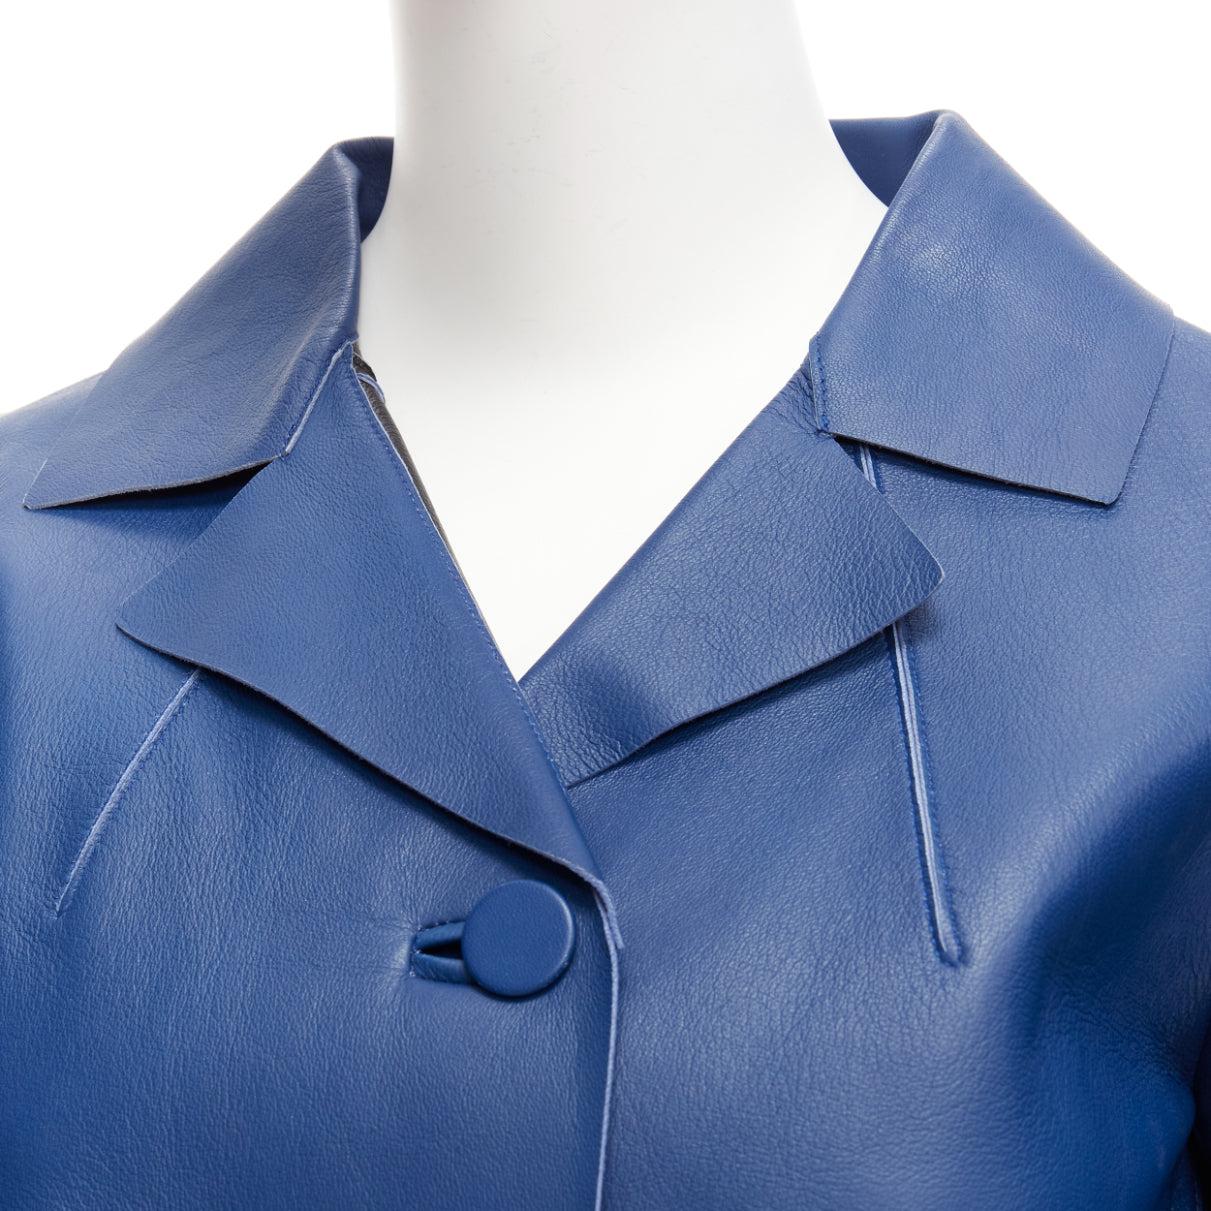 MARNI 2013 blue lambskin leather shoulder darts pocketed cropped jacket IT36 XXS
Reference: TGAS/D01073
Brand: Marni
Collection: 2013
Material: Leather
Color: Blue
Pattern: Solid
Closure: Button
Lining: Black Leather
Extra Details: Shoulder darts